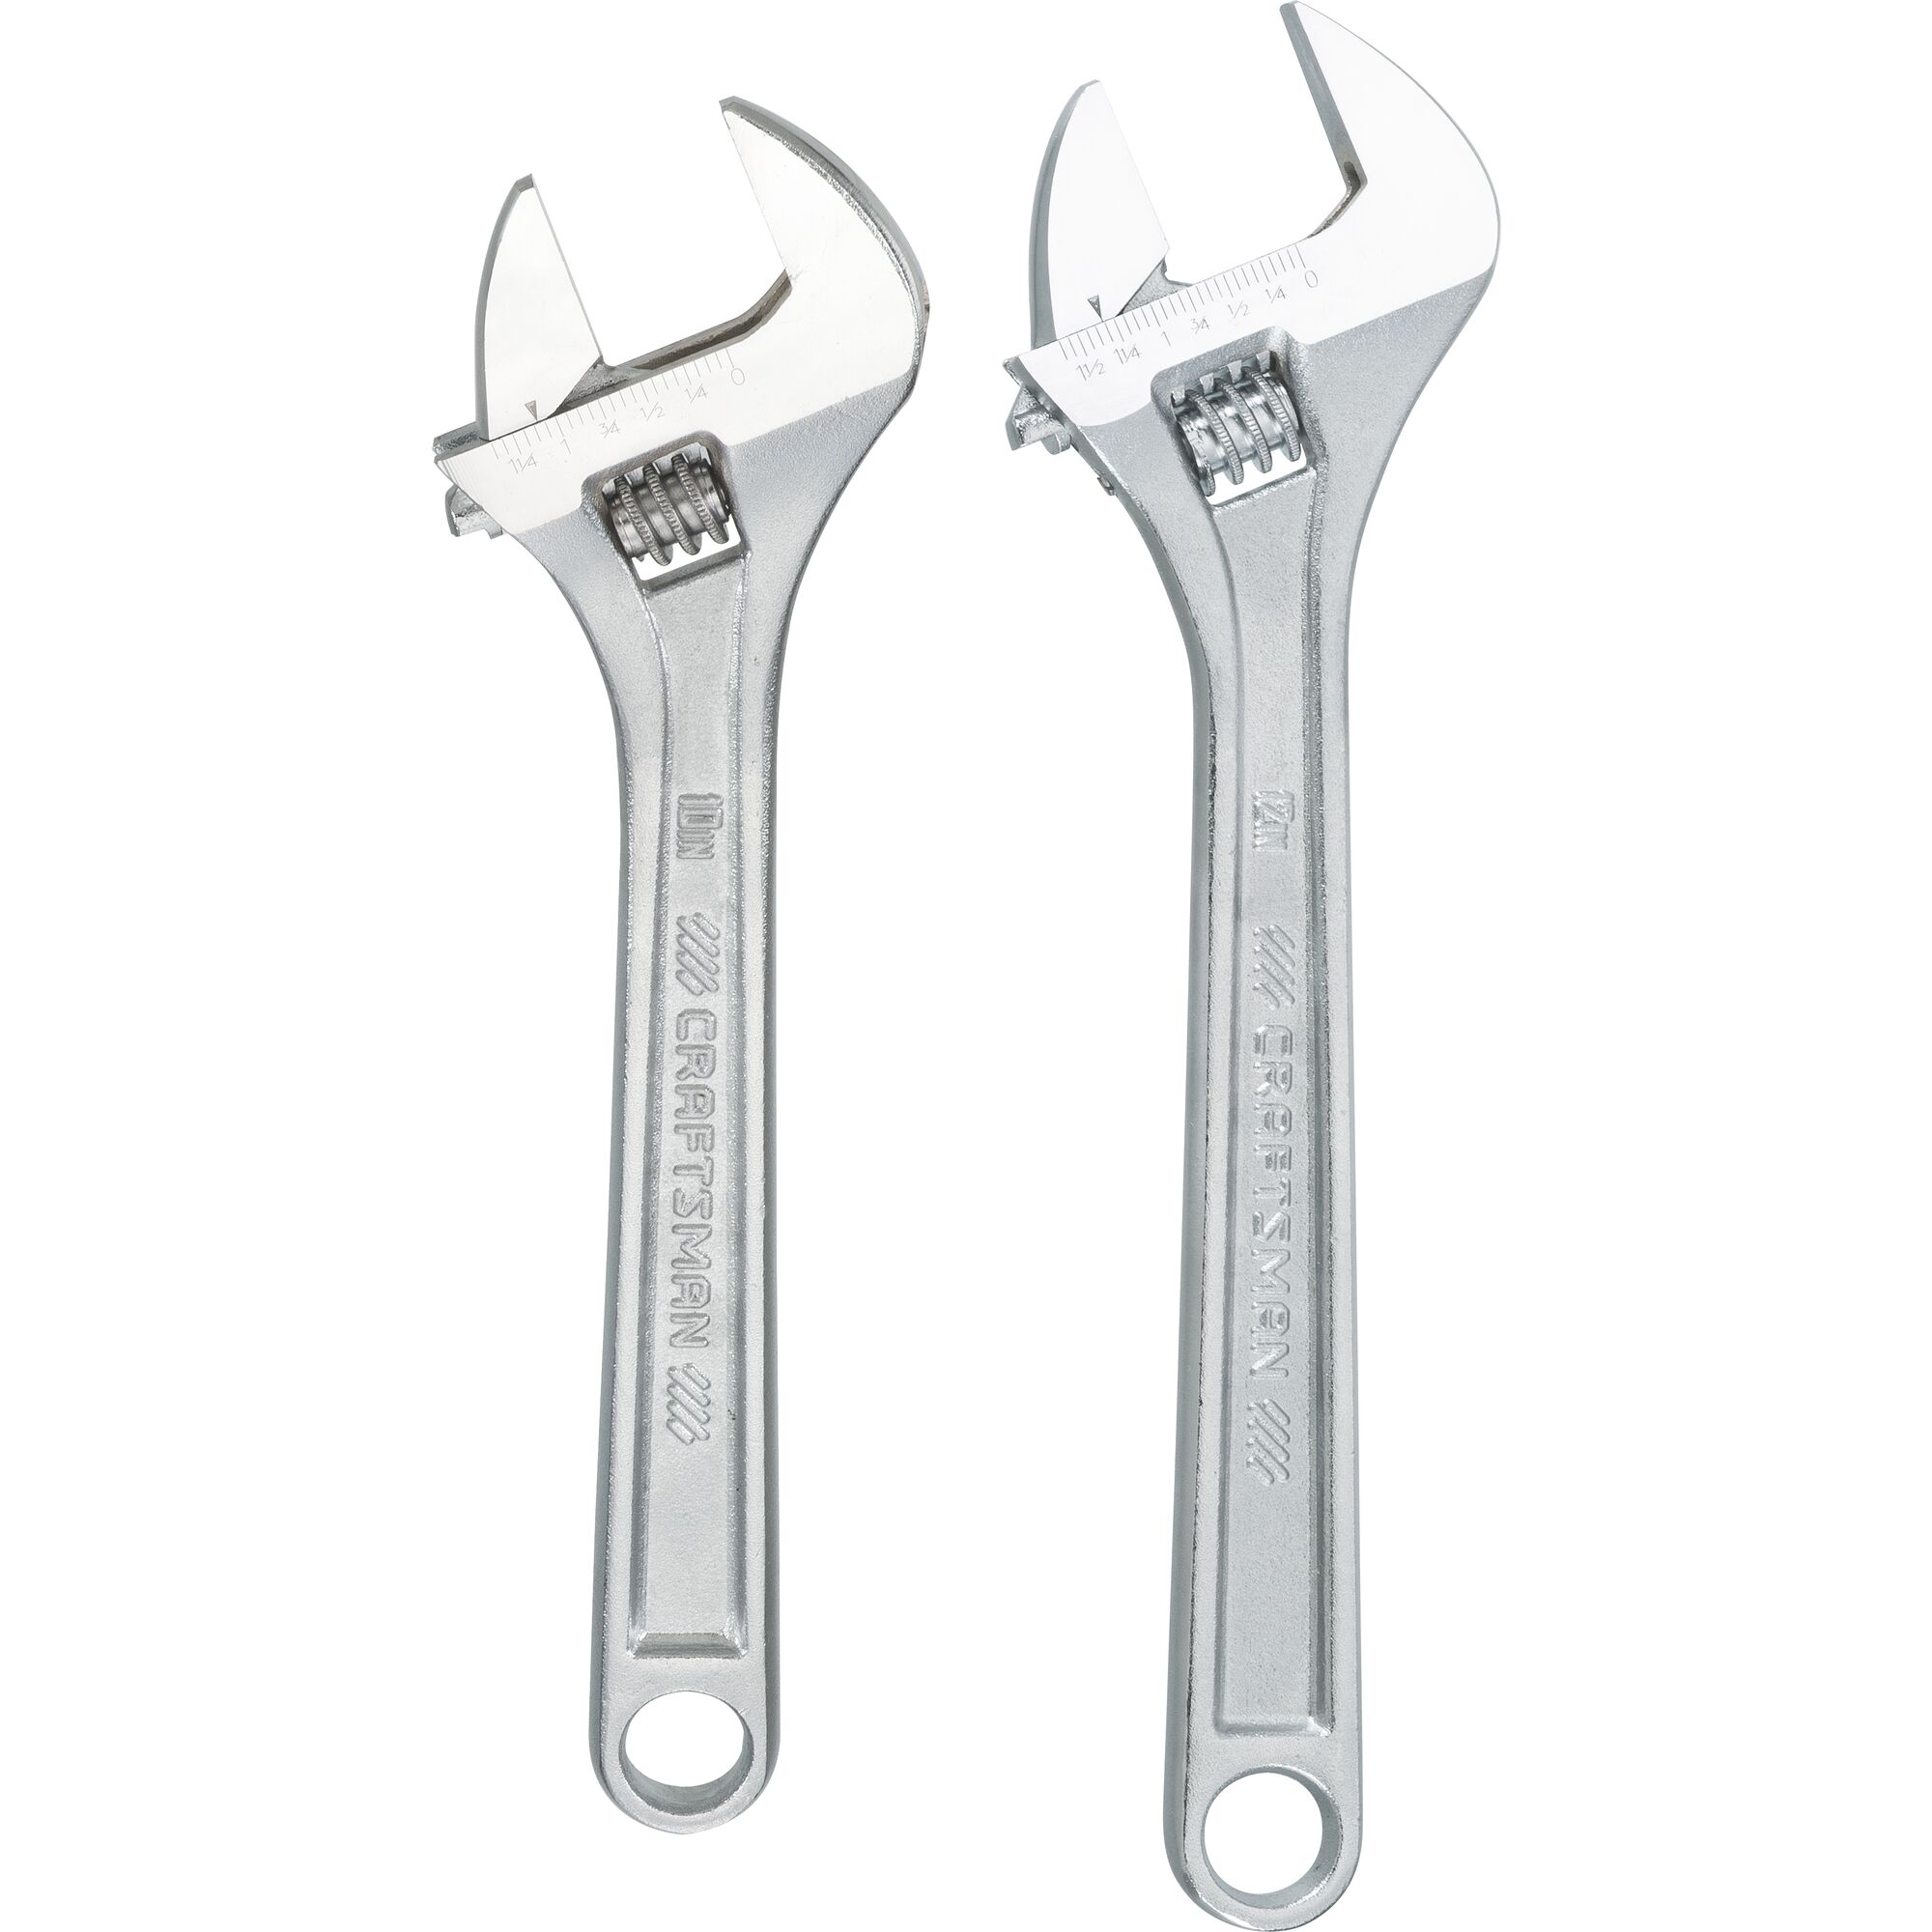 View of CRAFTSMAN Wrenches: Adjustable on white background